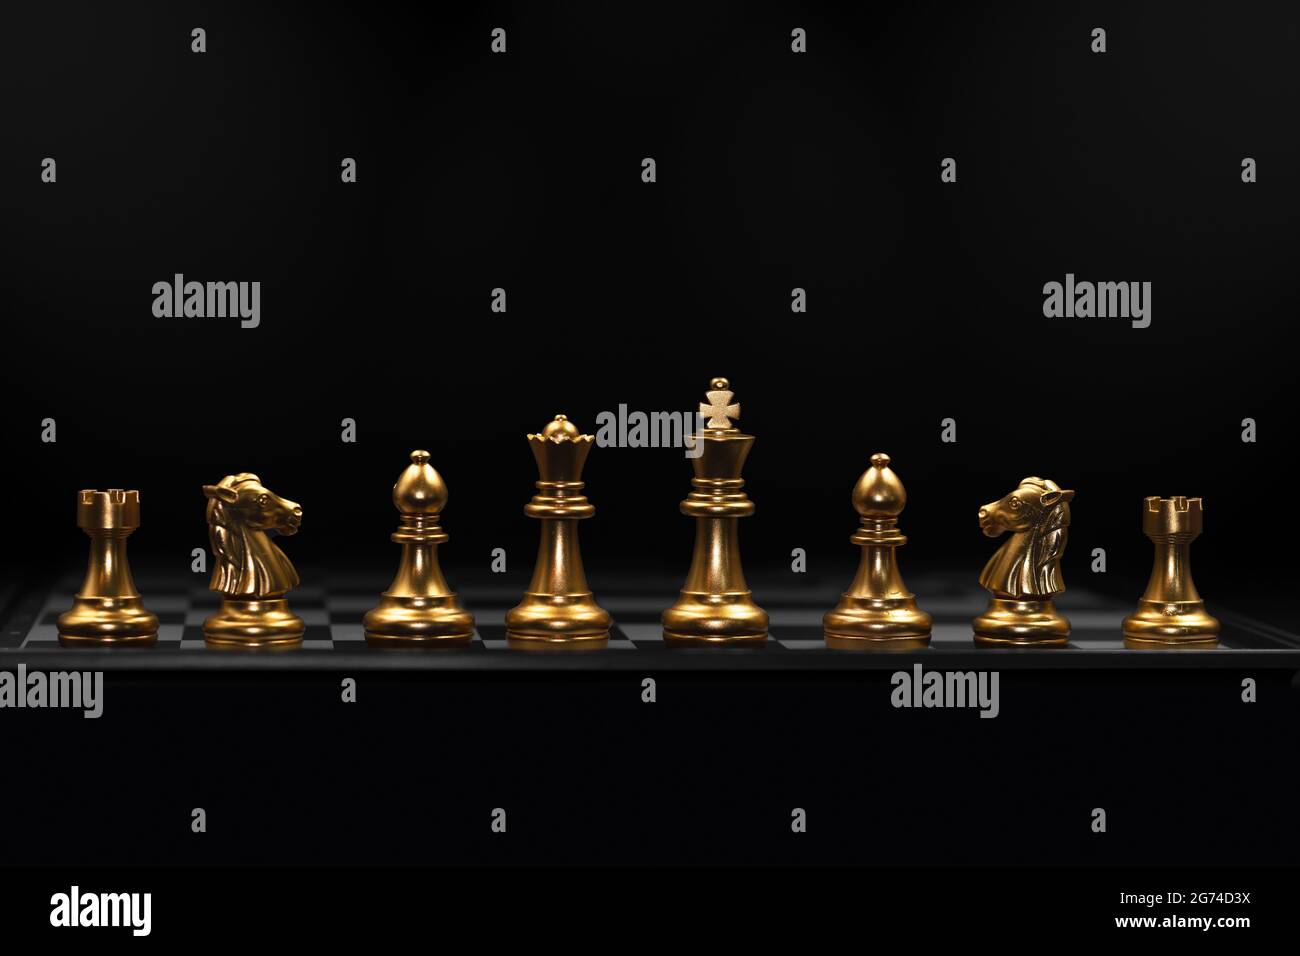 Row of Chess piece used in playing the game of chess. Business play role stand for strong teamwork ready for fight concept. Stock Photo